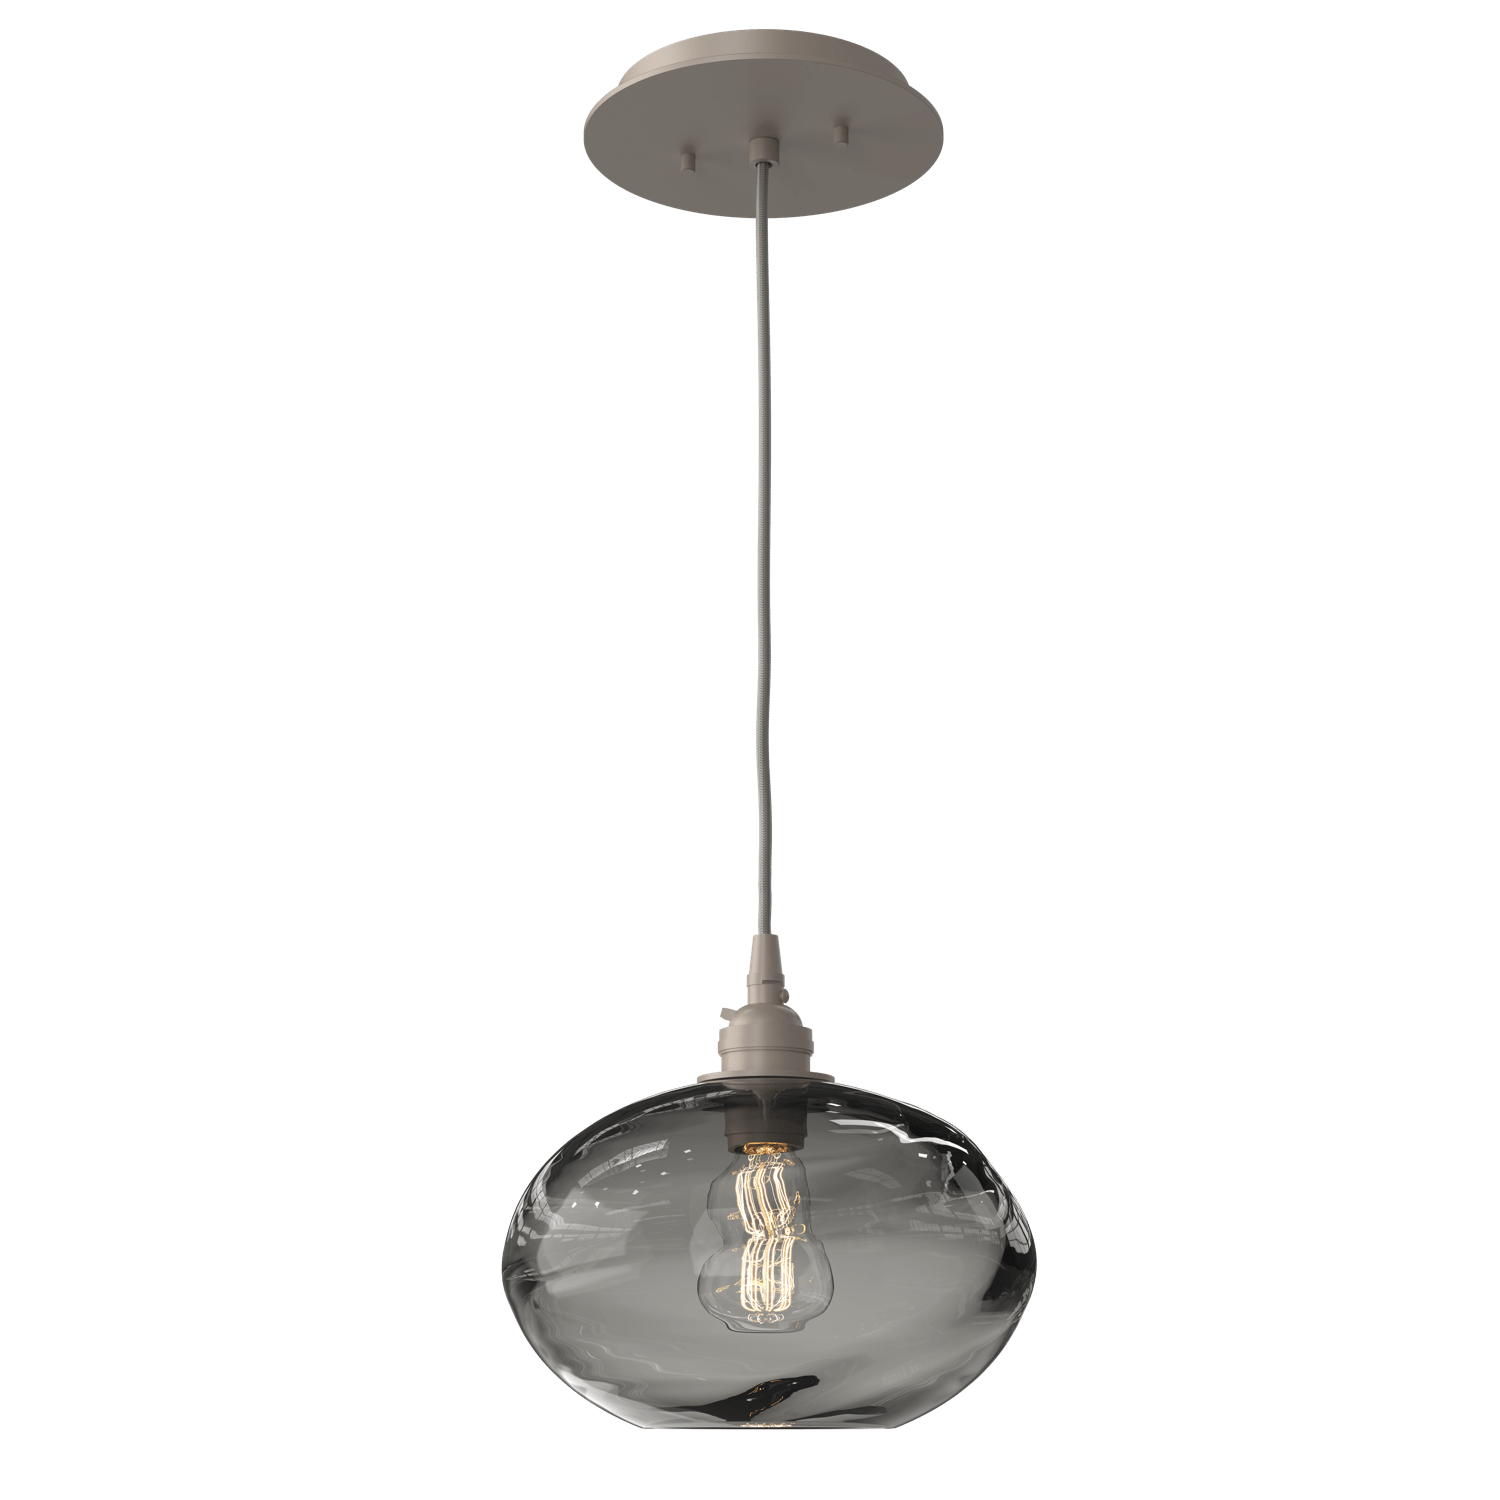 LAB0036-01-BS-OS-Hammerton-Studio-Optic-Blown-Glass-Coppa-pendant-light-with-metallic-beige-silver-finish-and-optic-smoke-blown-glass-shades-and-incandescent-lamping